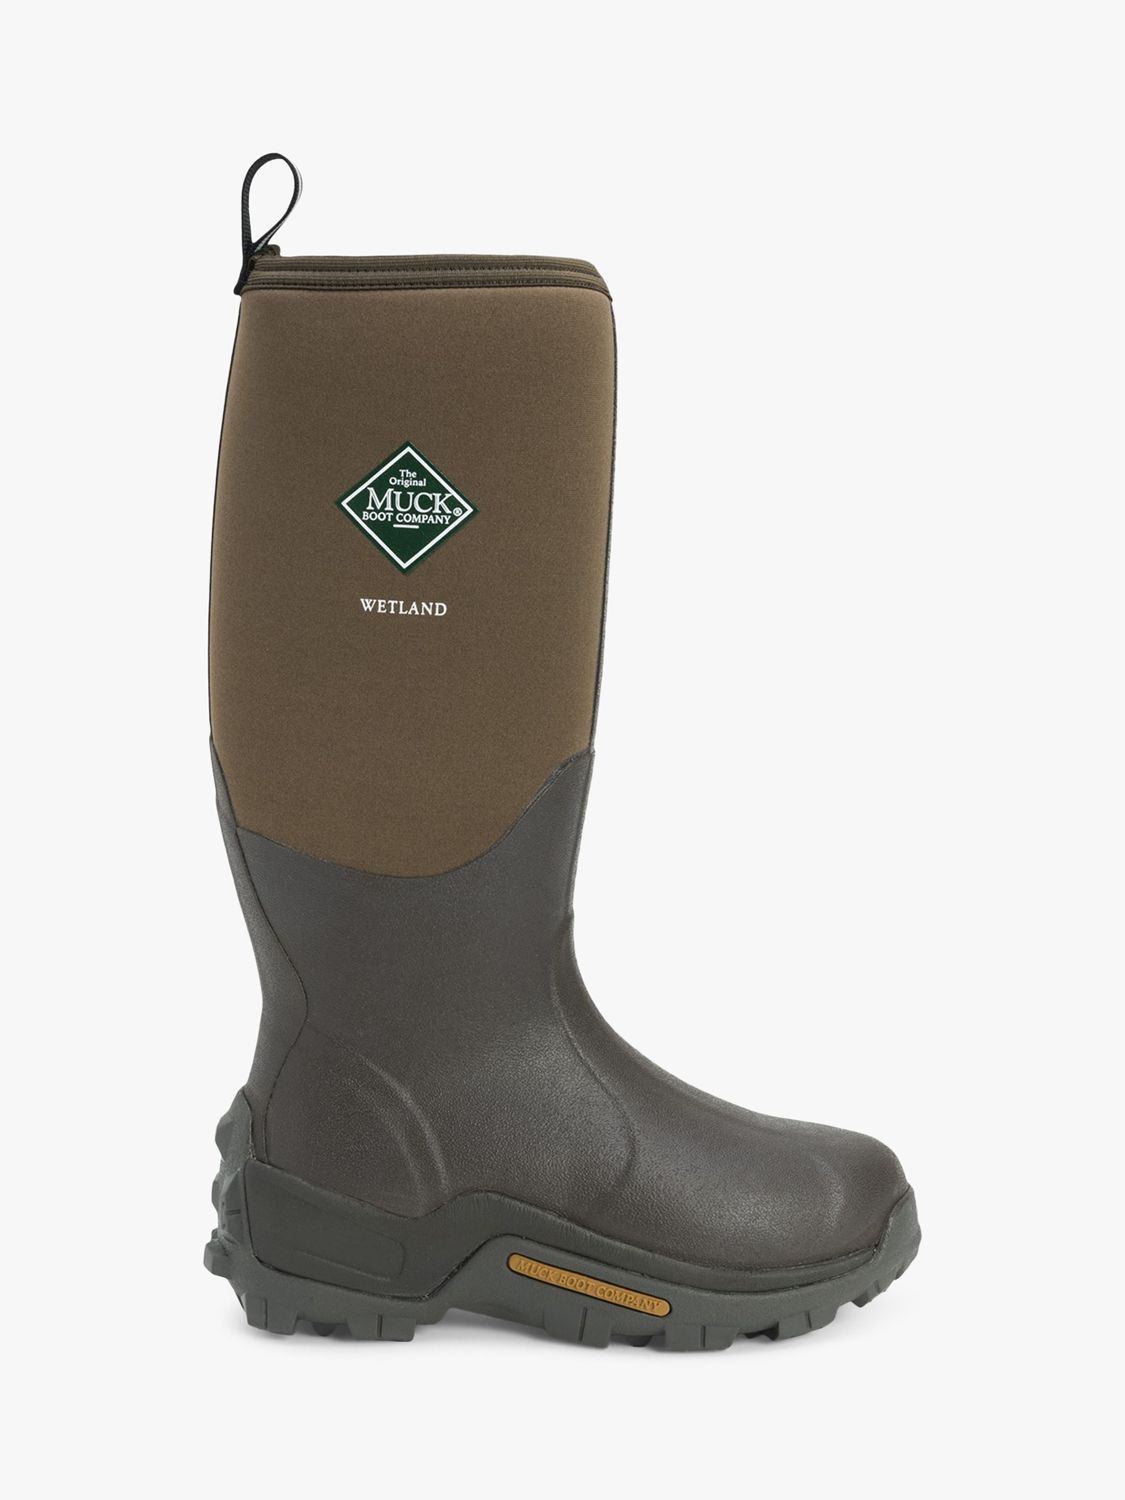 Muck Wetland Tall Wellington Boots, Brown at John Lewis & Partners